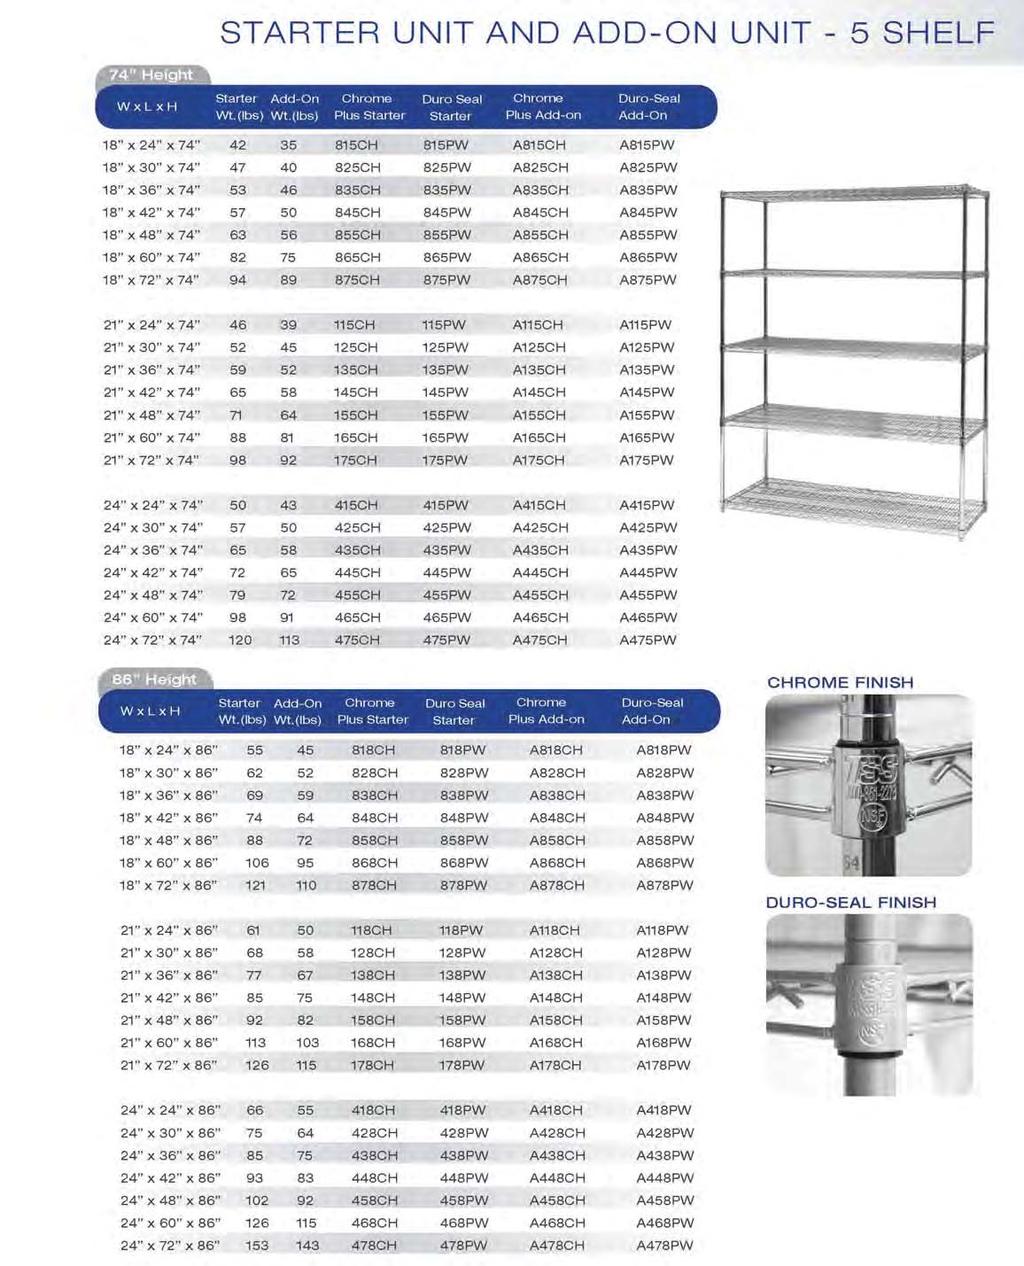 See page 2 for Spacesaver part number